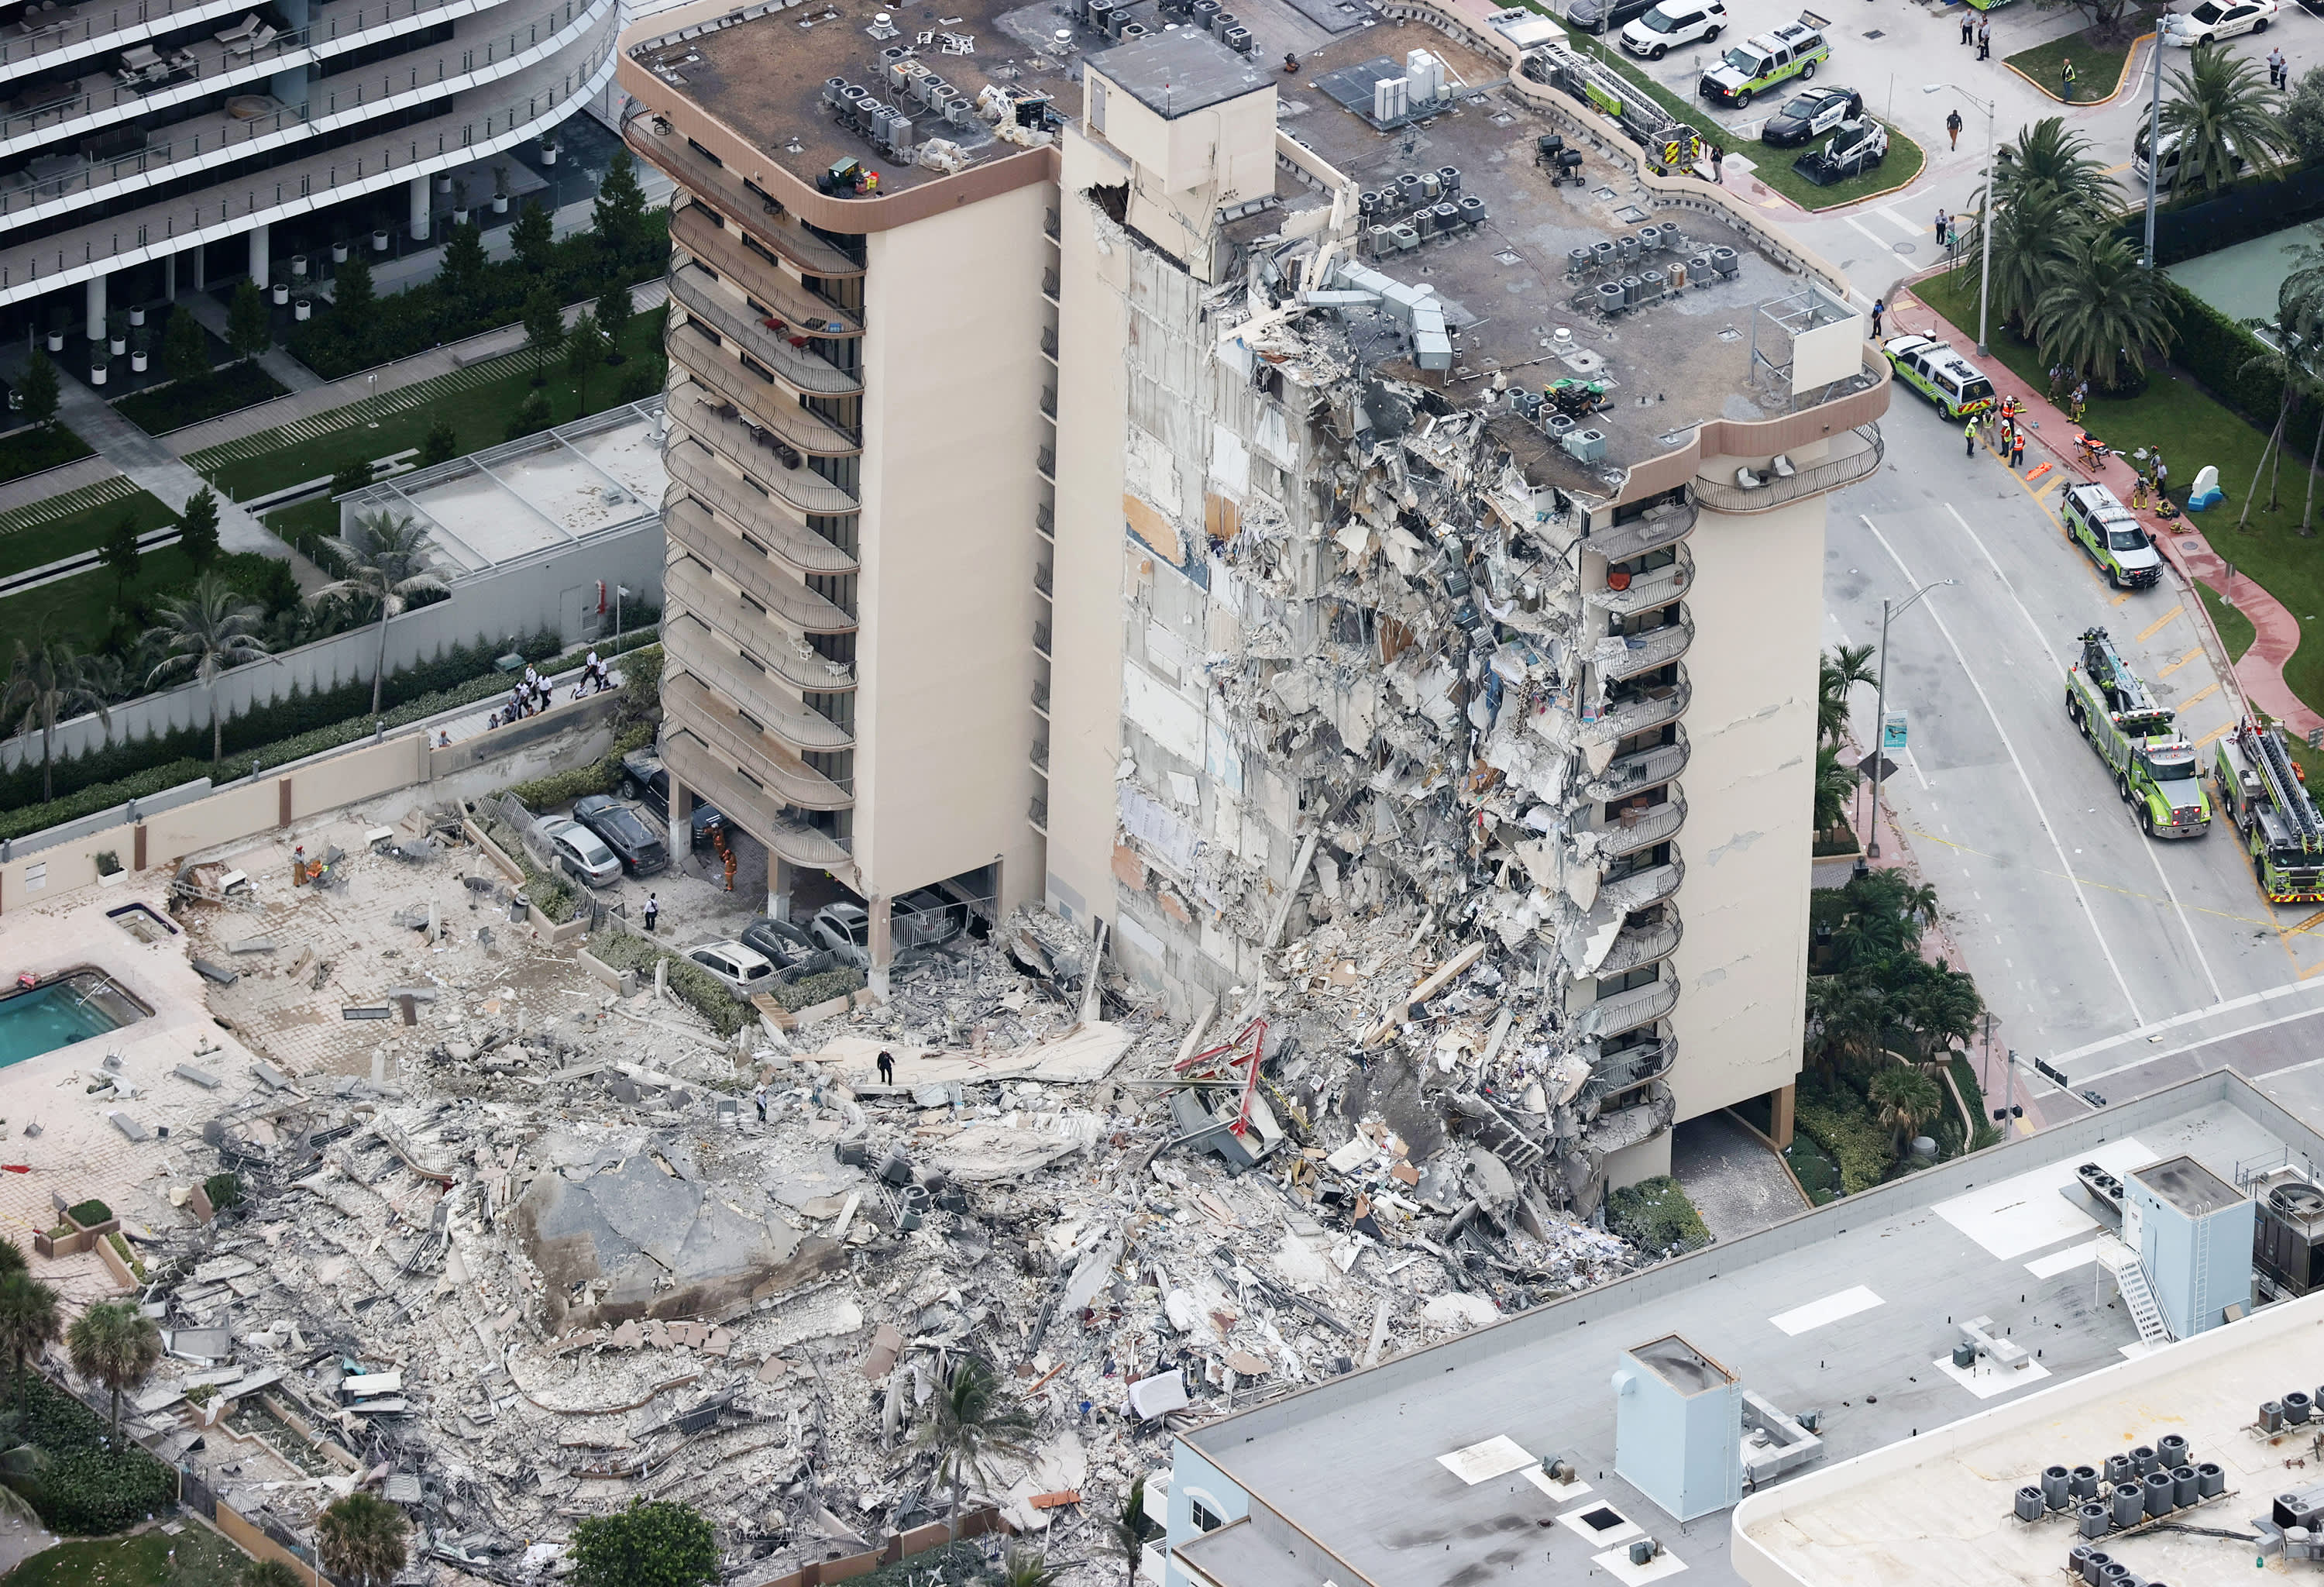 Engineer found major structural damage to Florida condo tower nearly three years before collapse